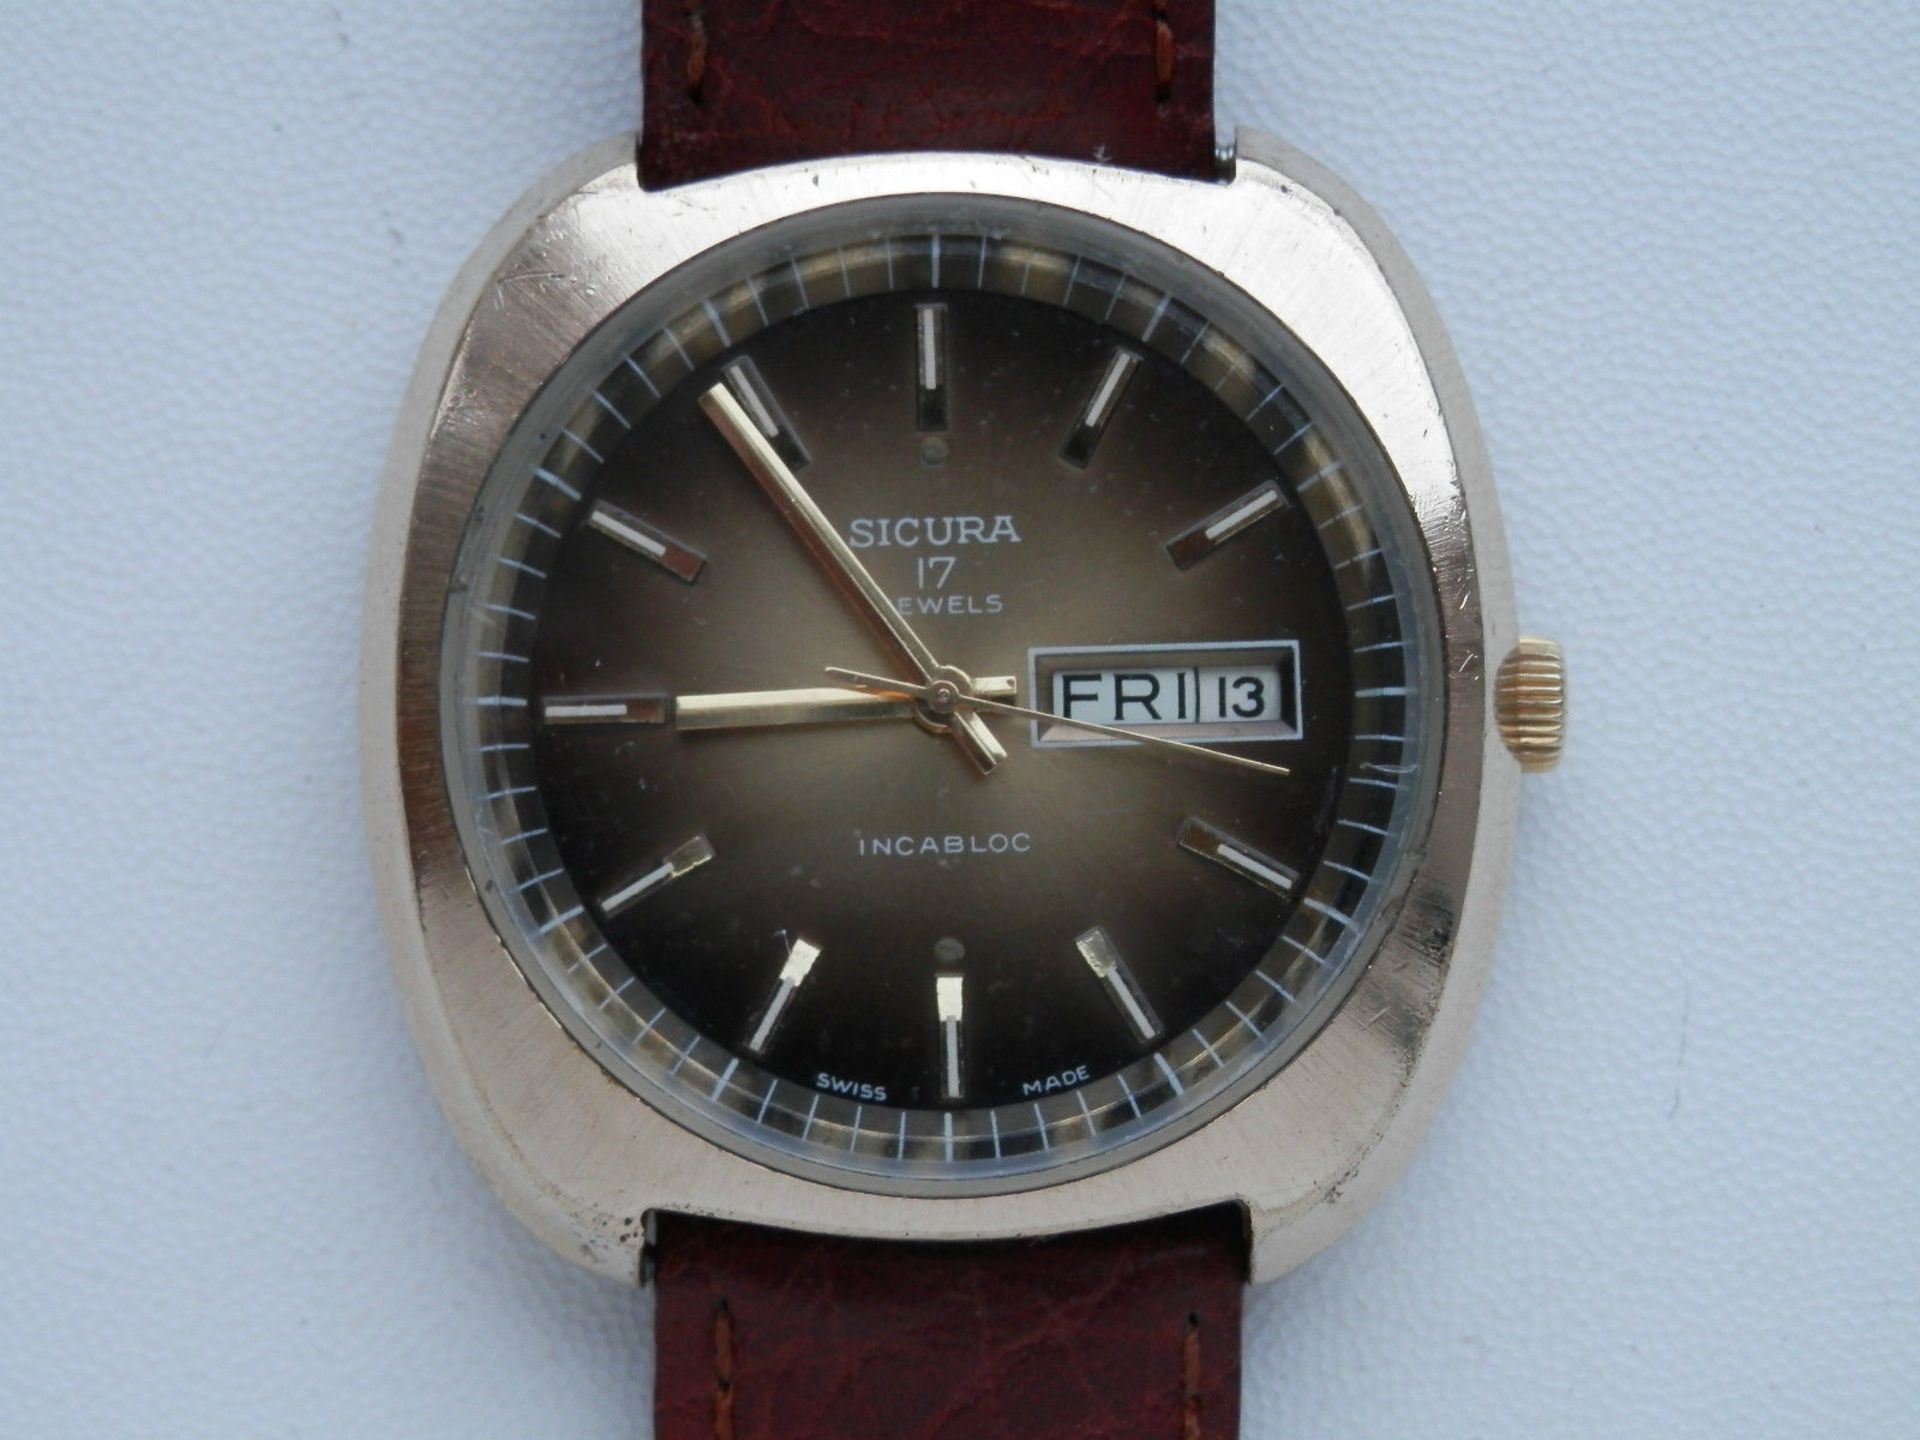 GORGEOUS LOOKING VINTAGE SICURA (BREITLING) GENTS SWISS 17 JEWEL AUTO DAY/DATE WATCH - Image 2 of 21